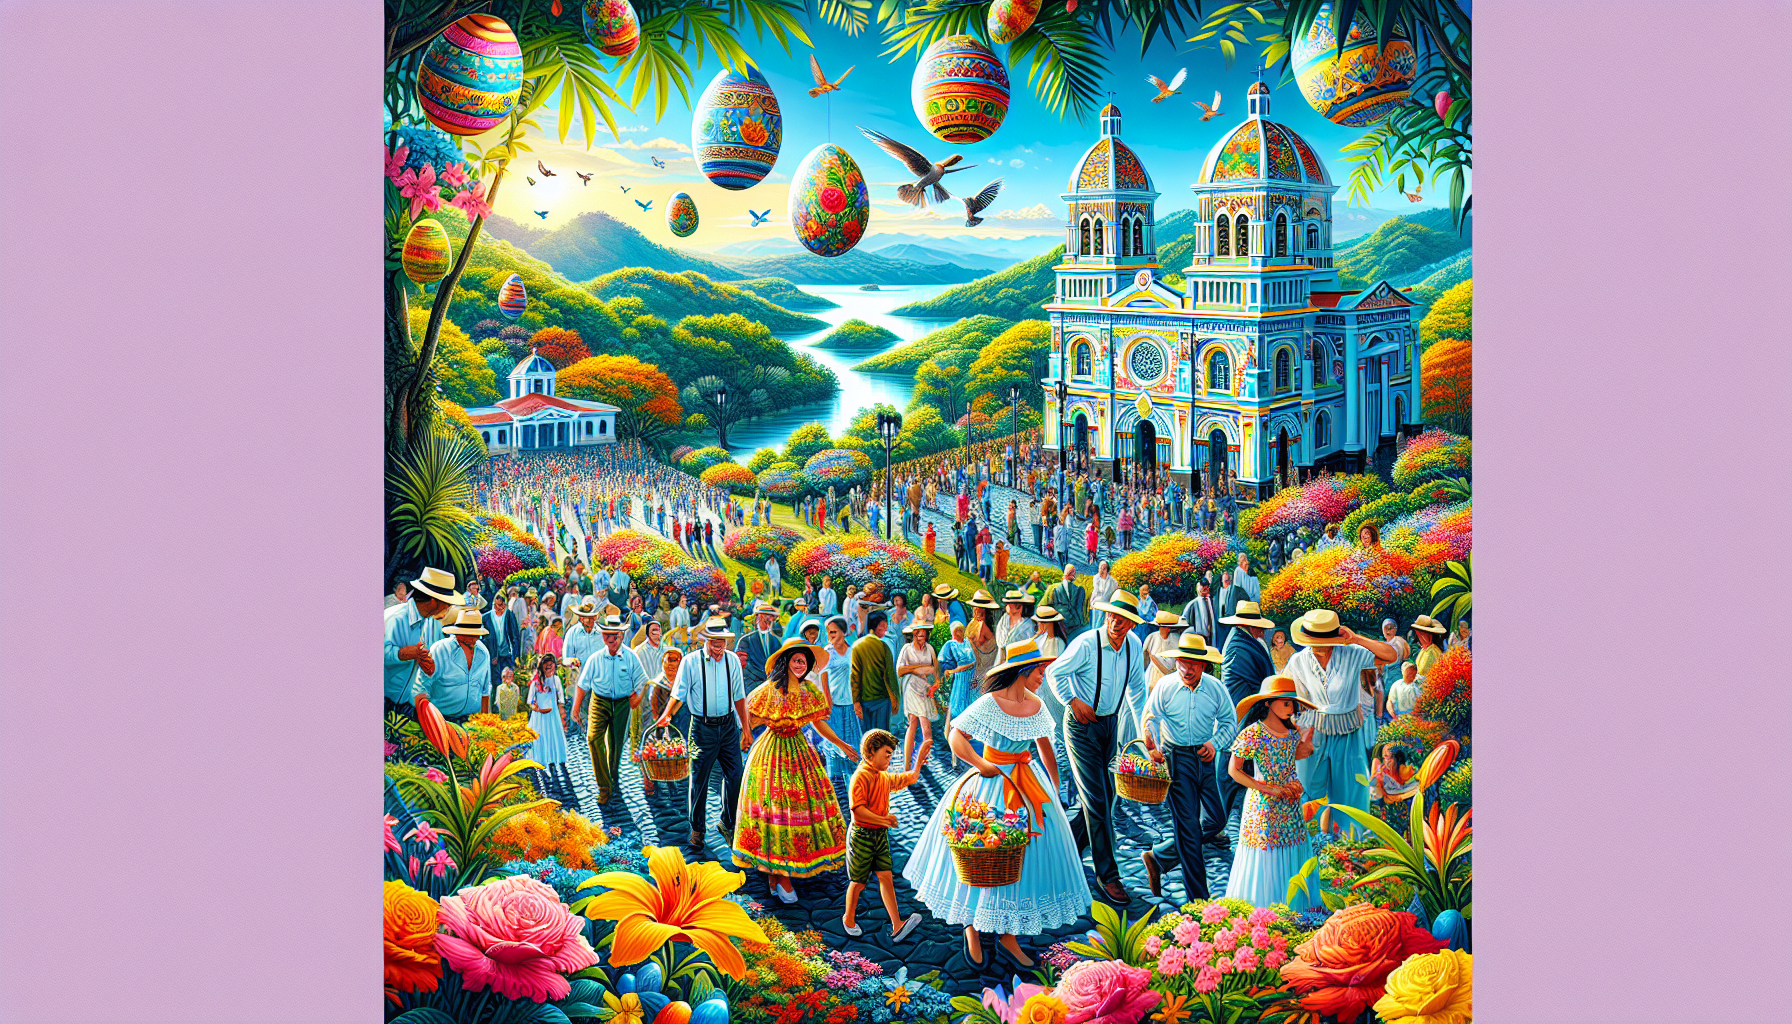 Create an image of a vibrant Easter celebration in Costa Rica, featuring colorful parades with people in traditional costumes, elaborately decorated churches, and stunning tropical landscapes. Include